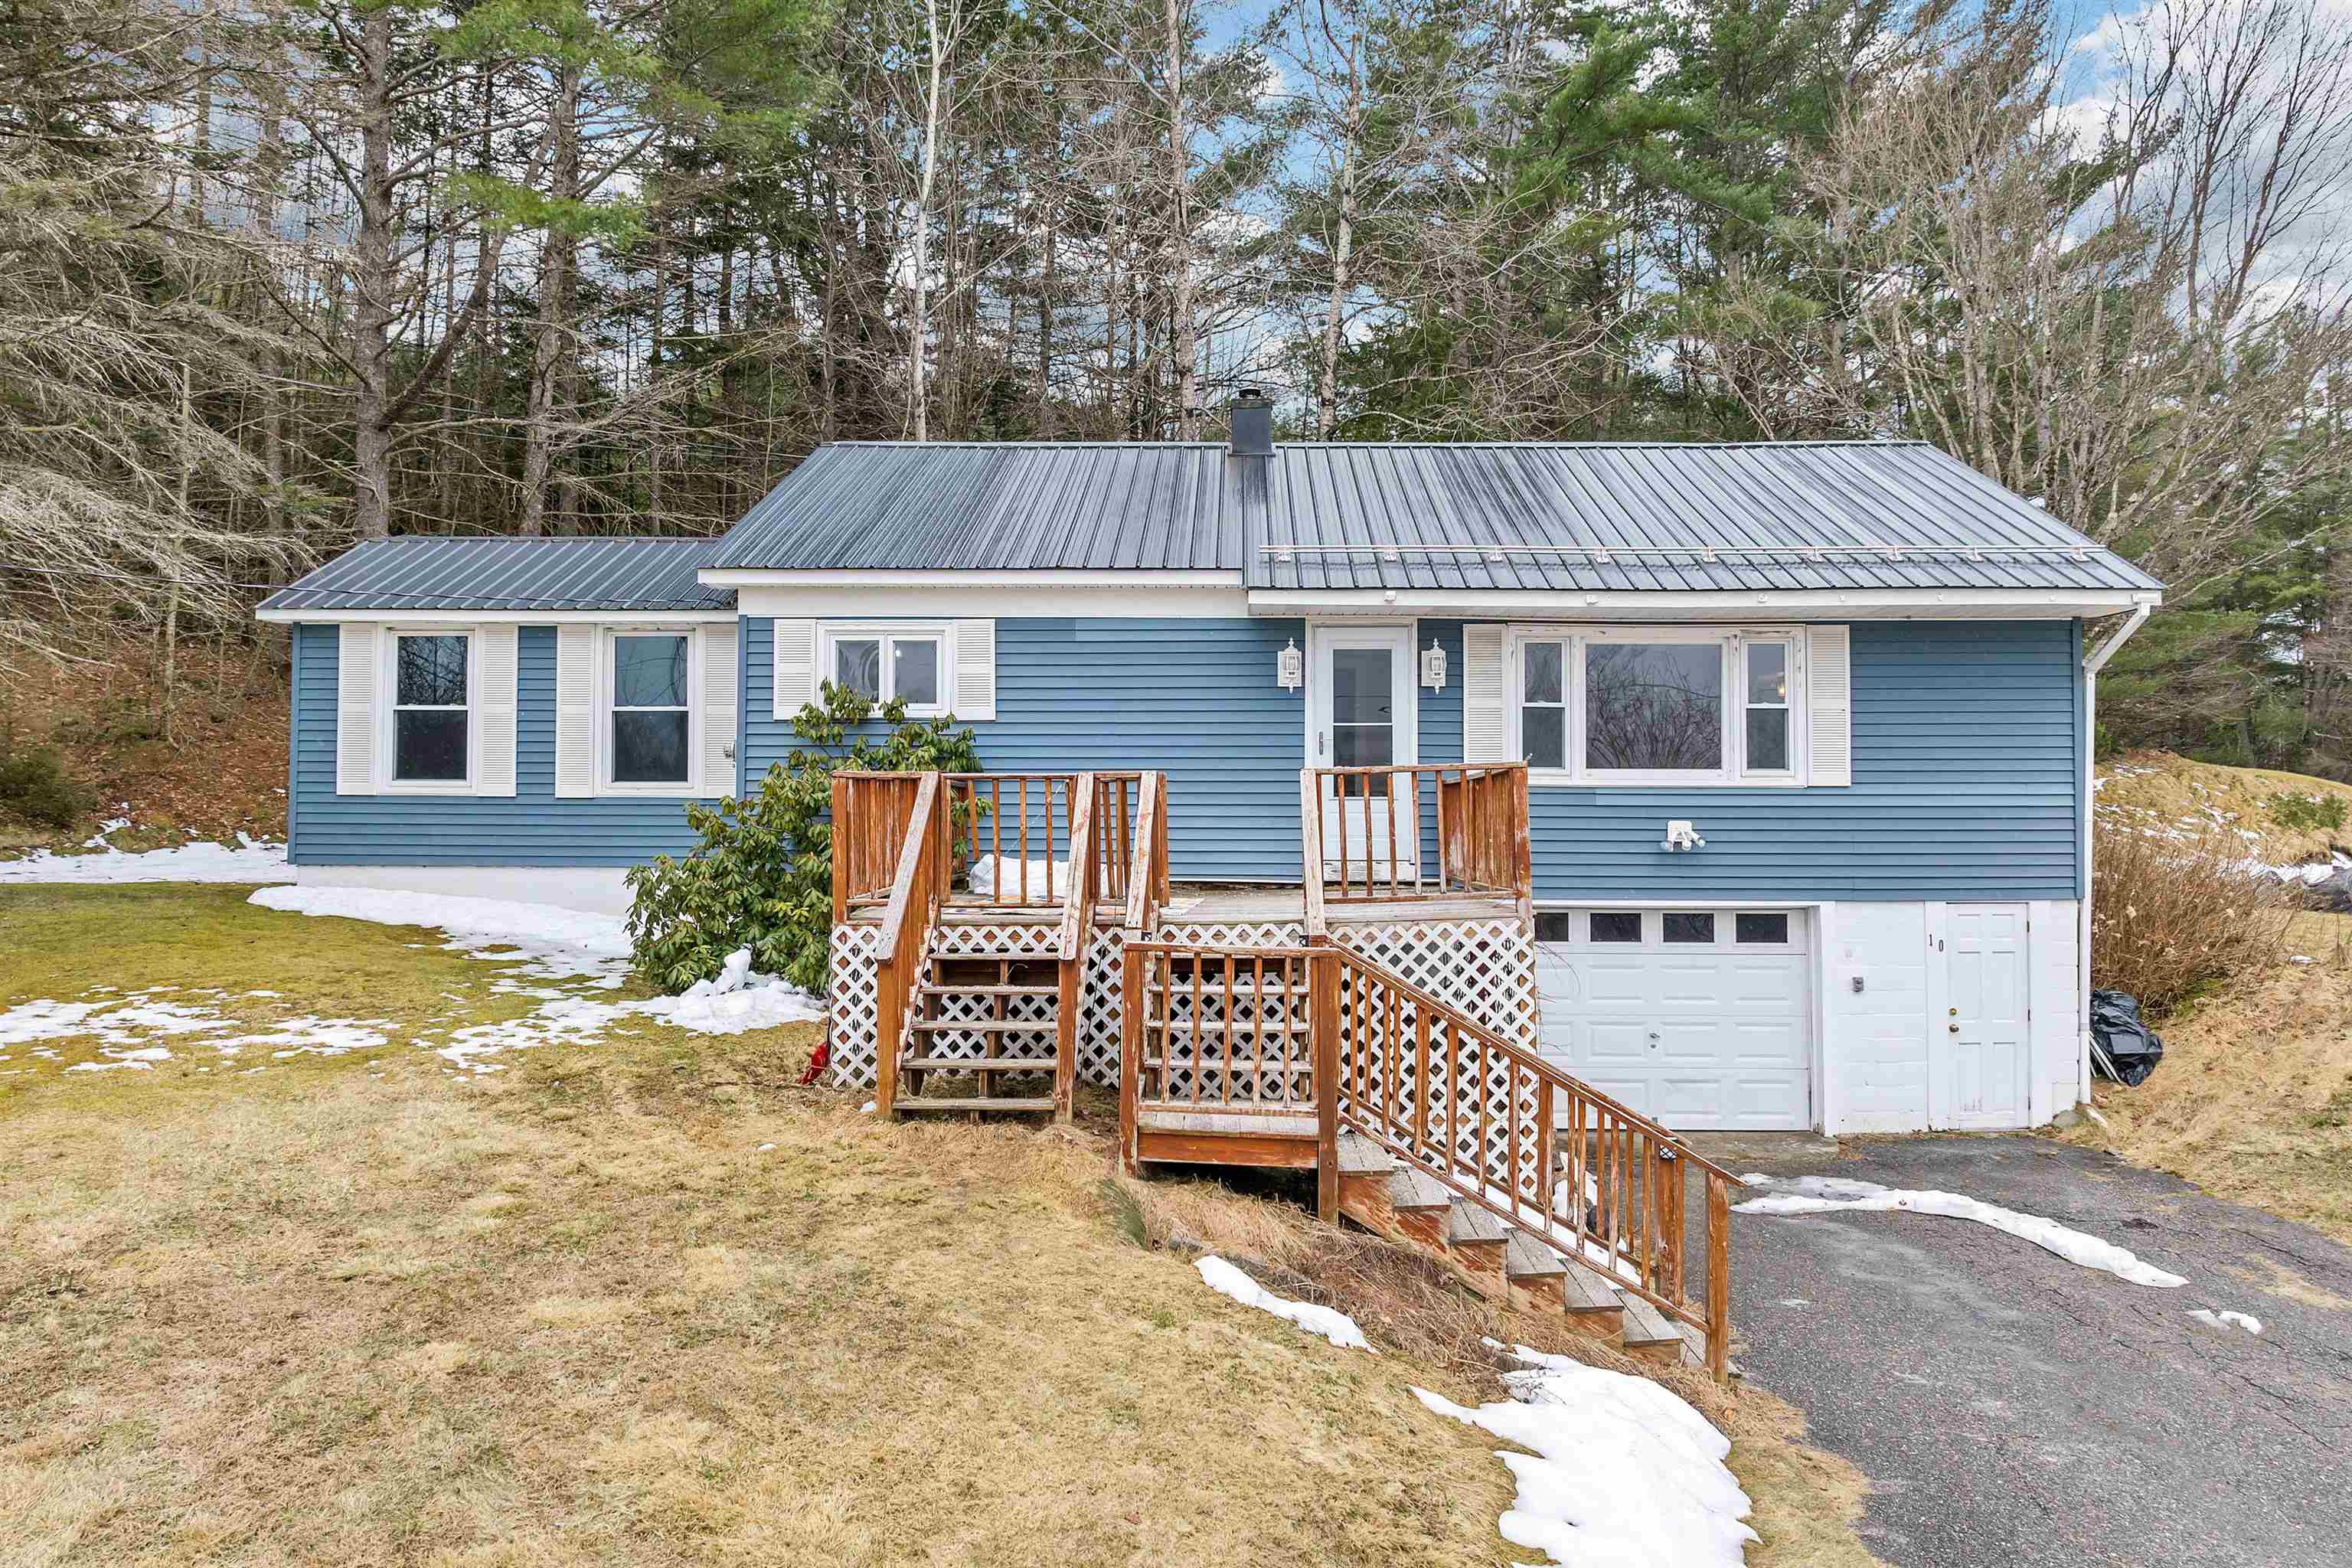 1 Story Single Family Home in Canaan NH